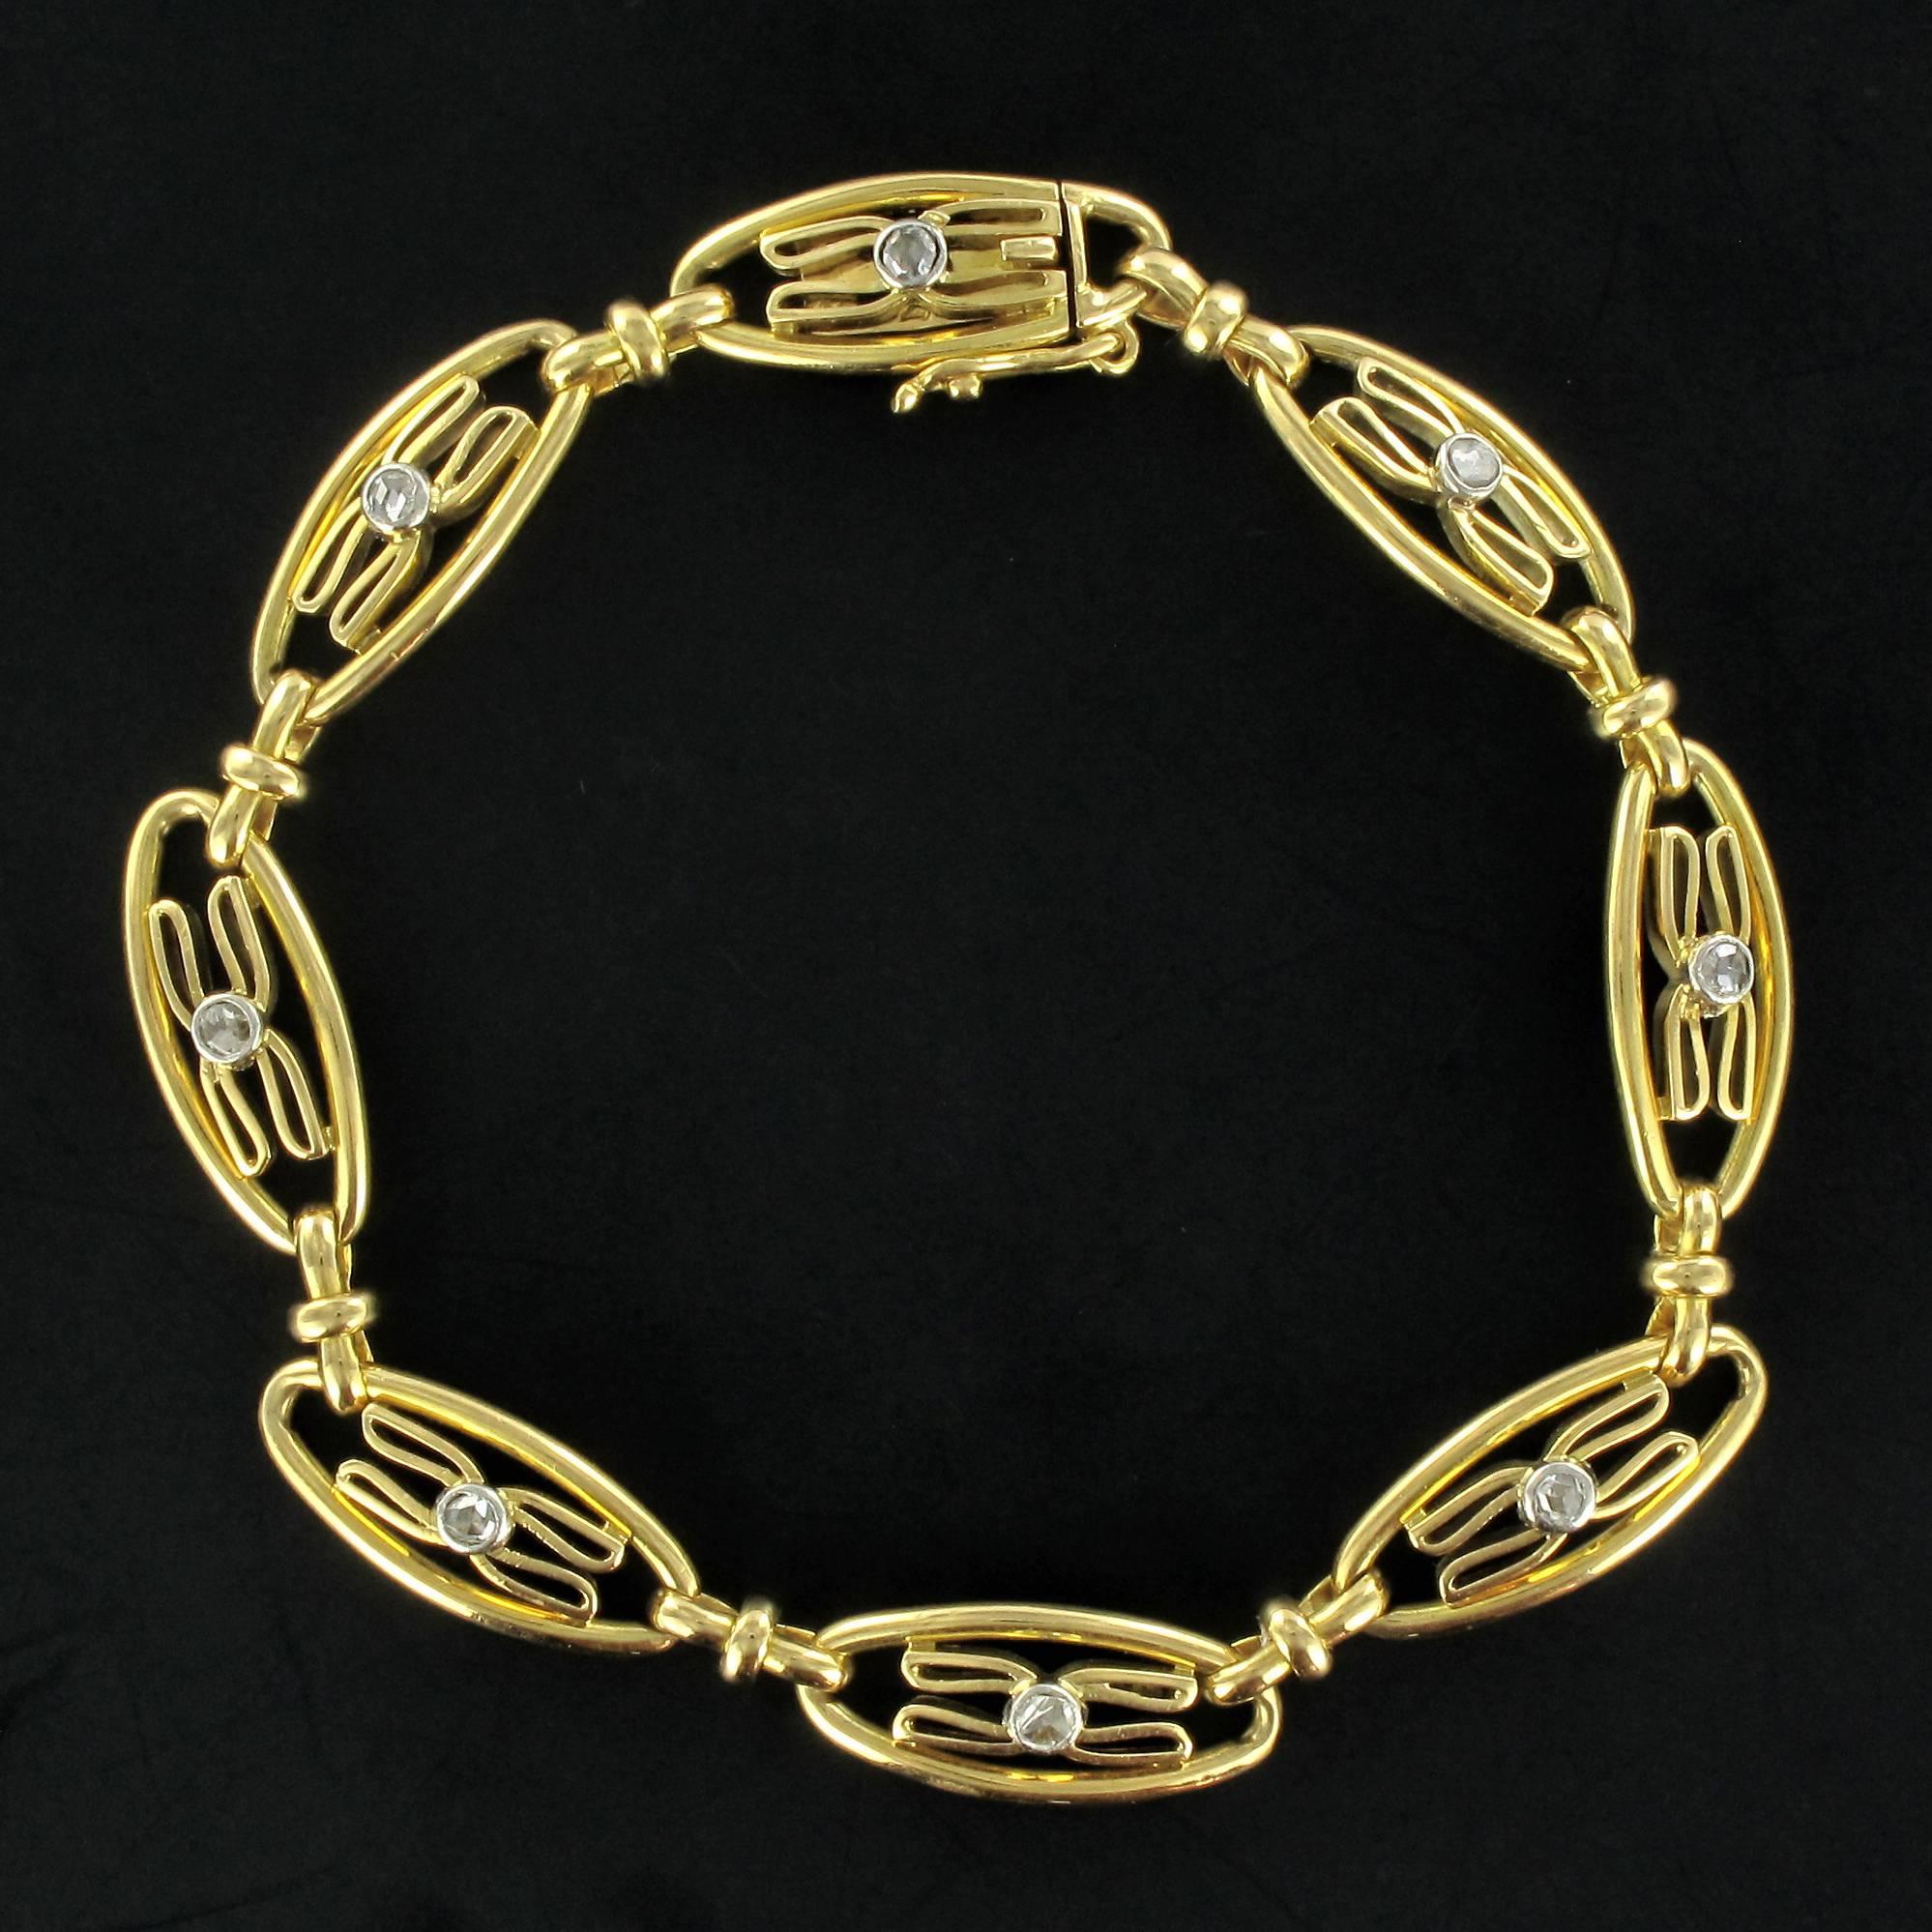 Bracelet in 18 carat yellow gold, eagle head and rhinoceros hallmarks. 

This bracelet is composed of 8 openwork shuttle shaped links each decorated with a bow featuring a central rose cut diamond. They are linked by small gold ties. The ratchet